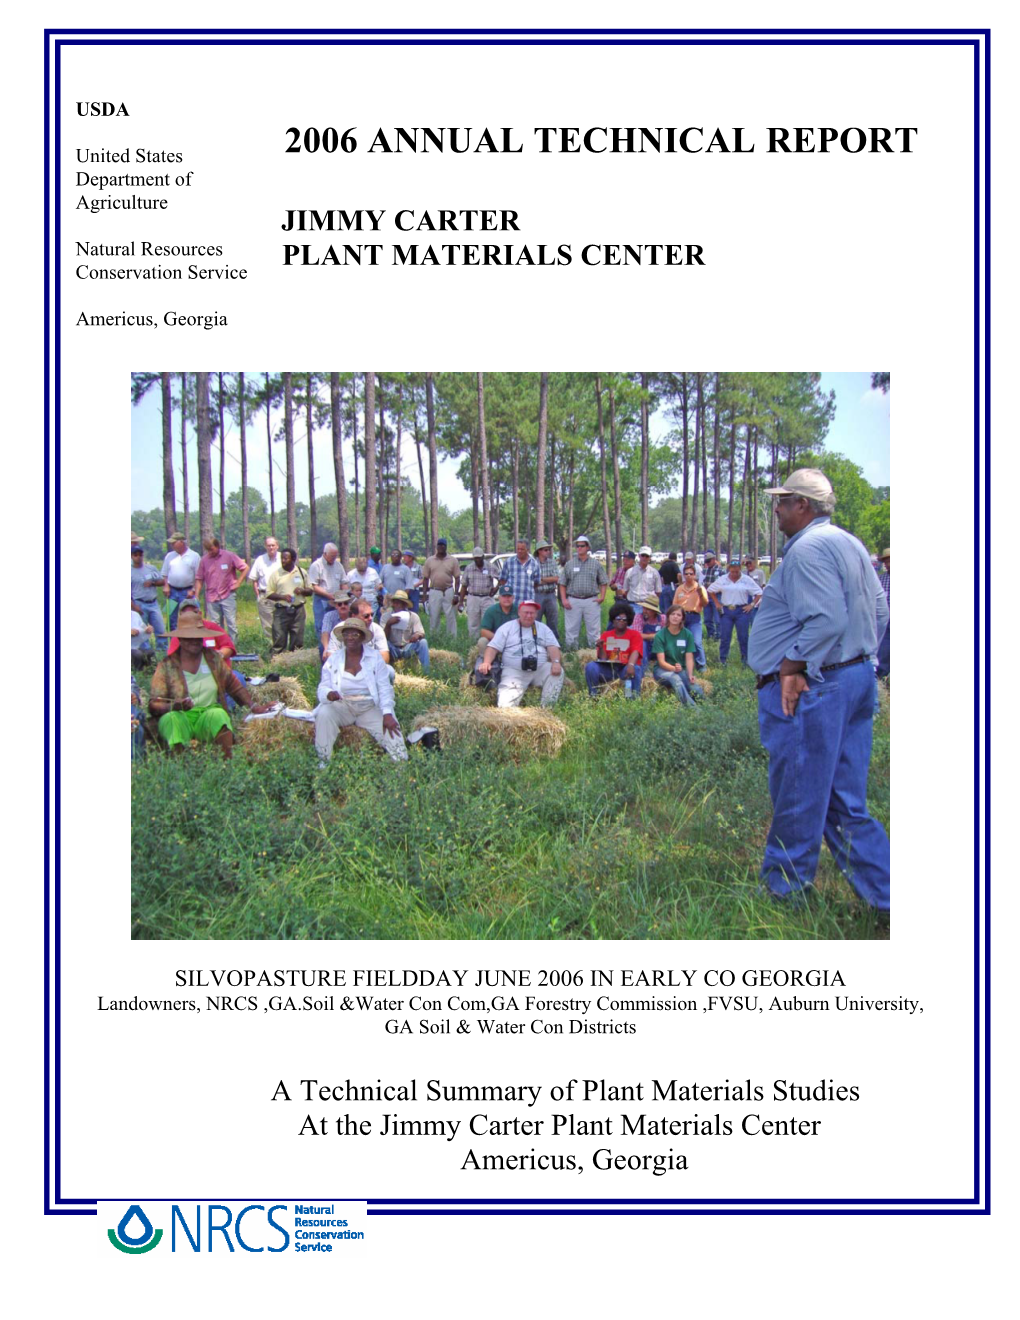 Jimmy Carter PMC 2006 Annual Technical Report